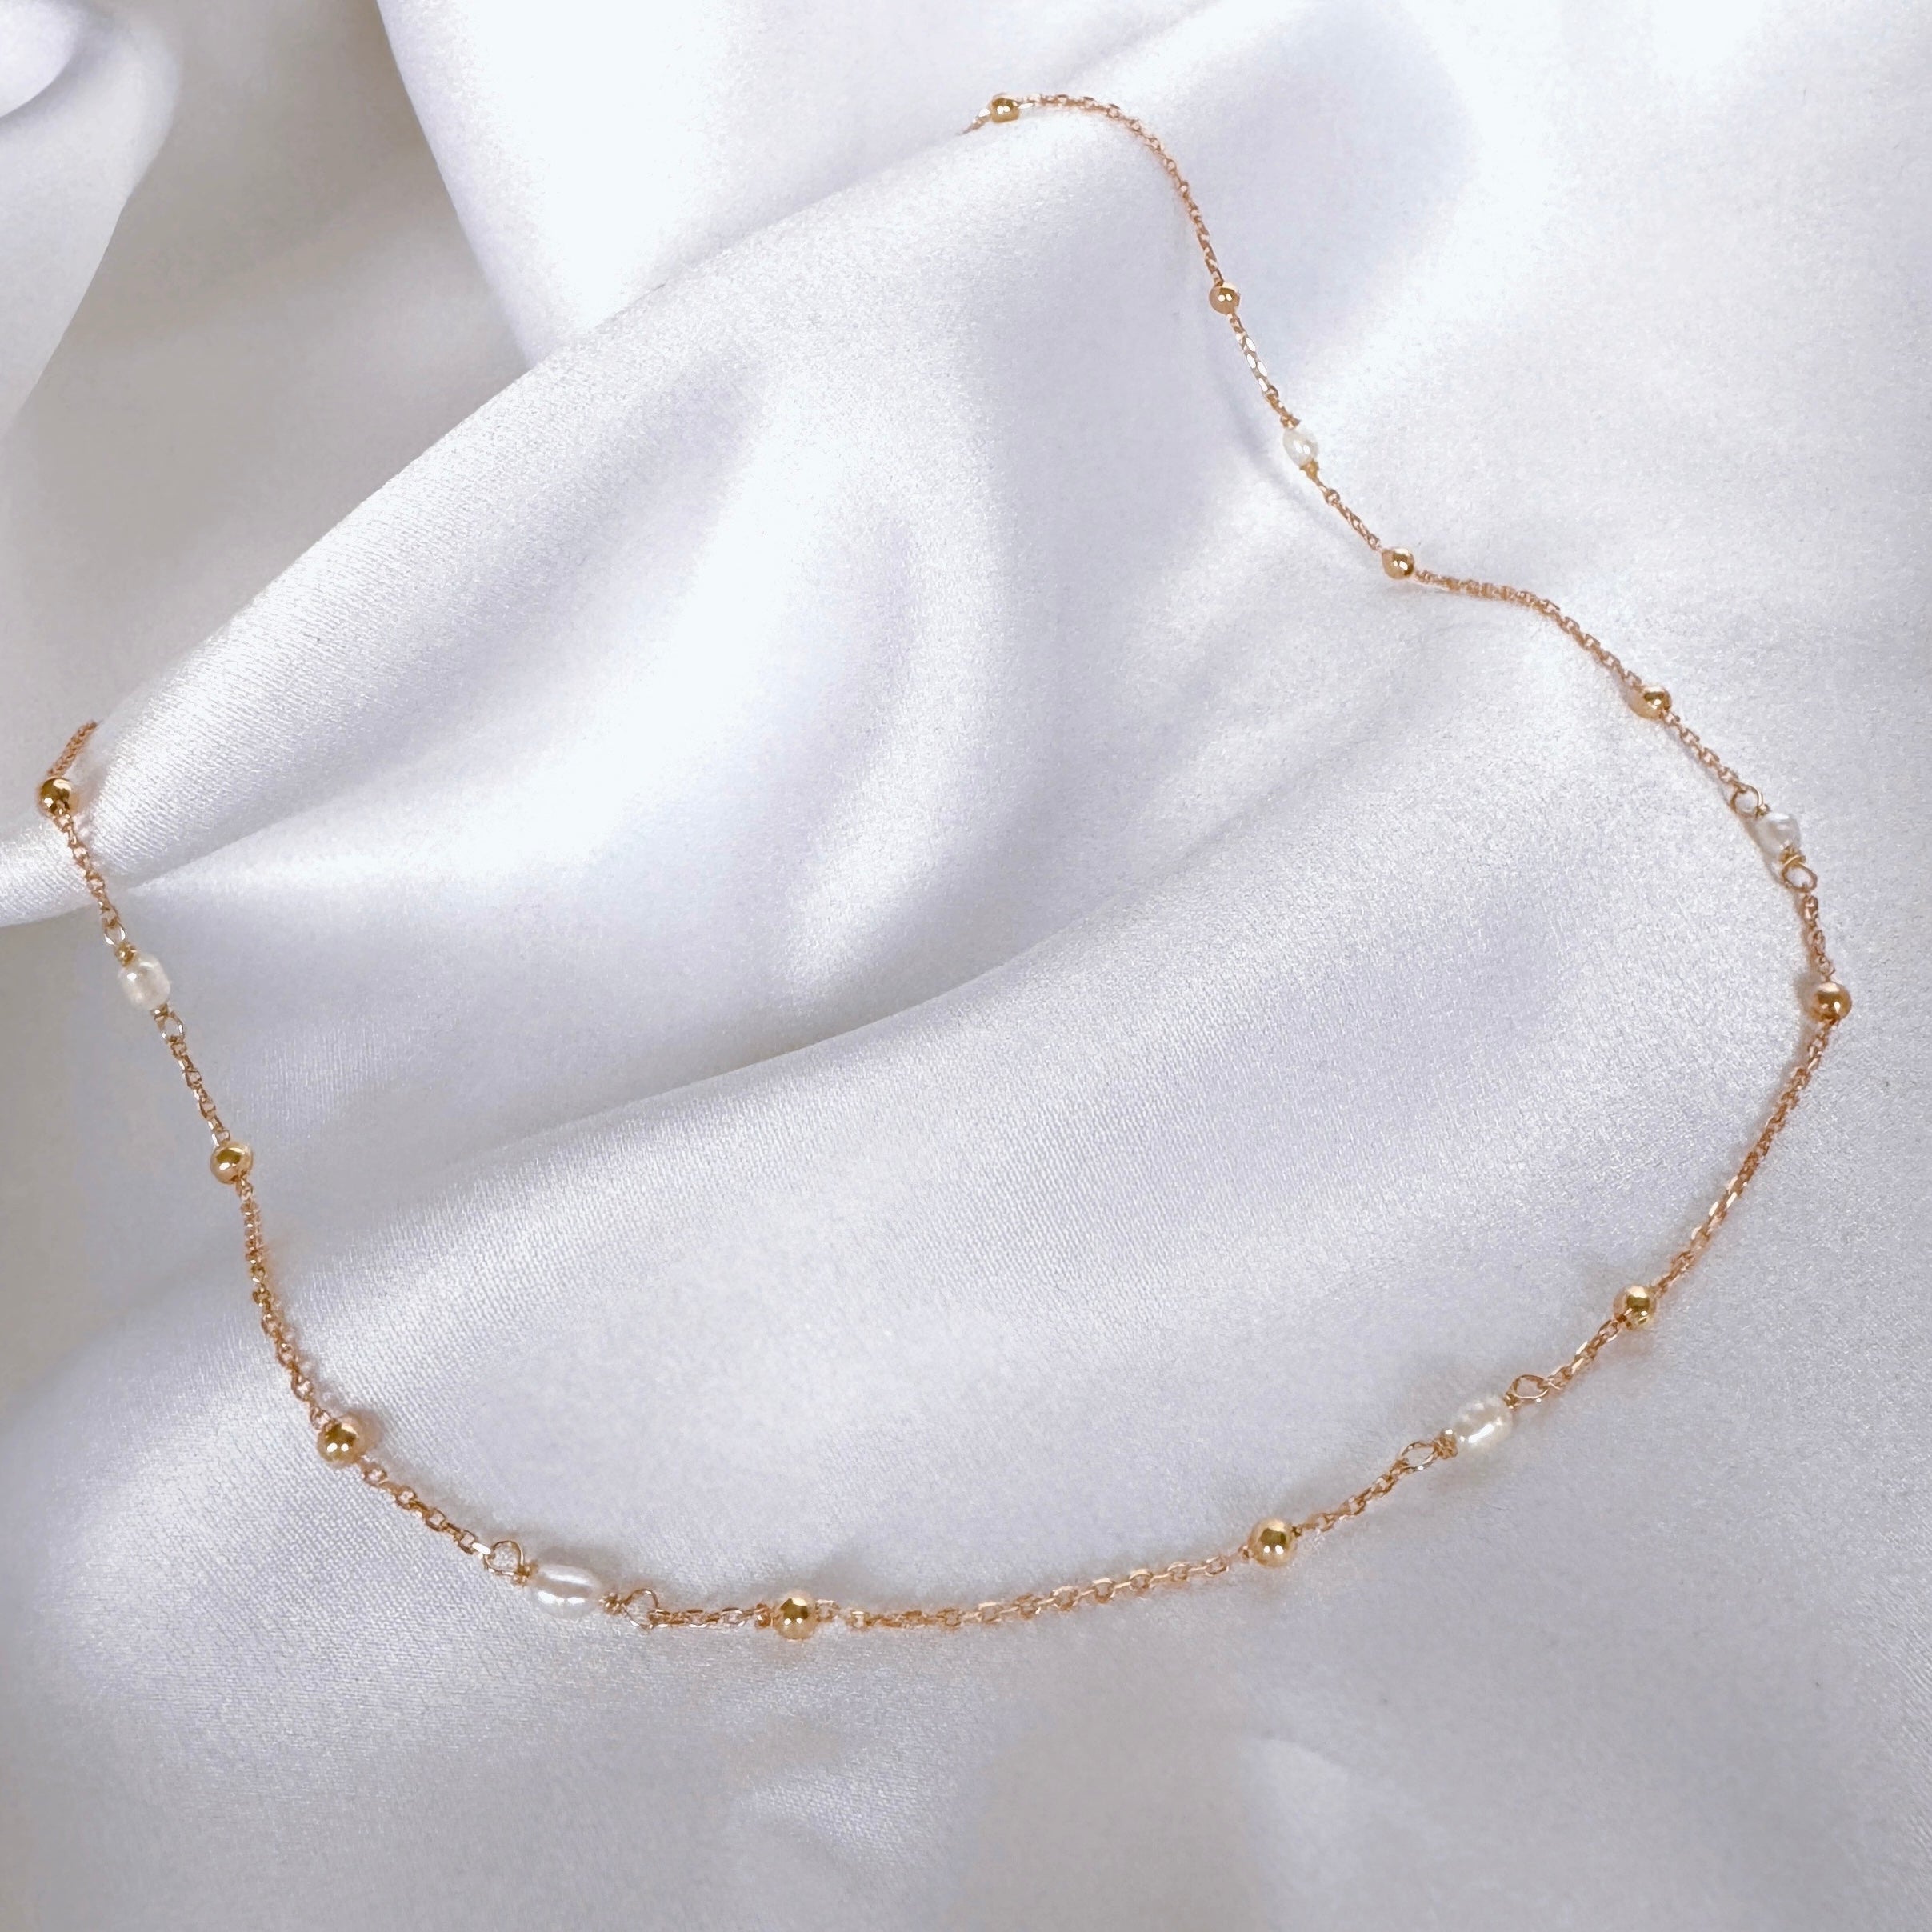 Gold-plated “Pearl” necklace